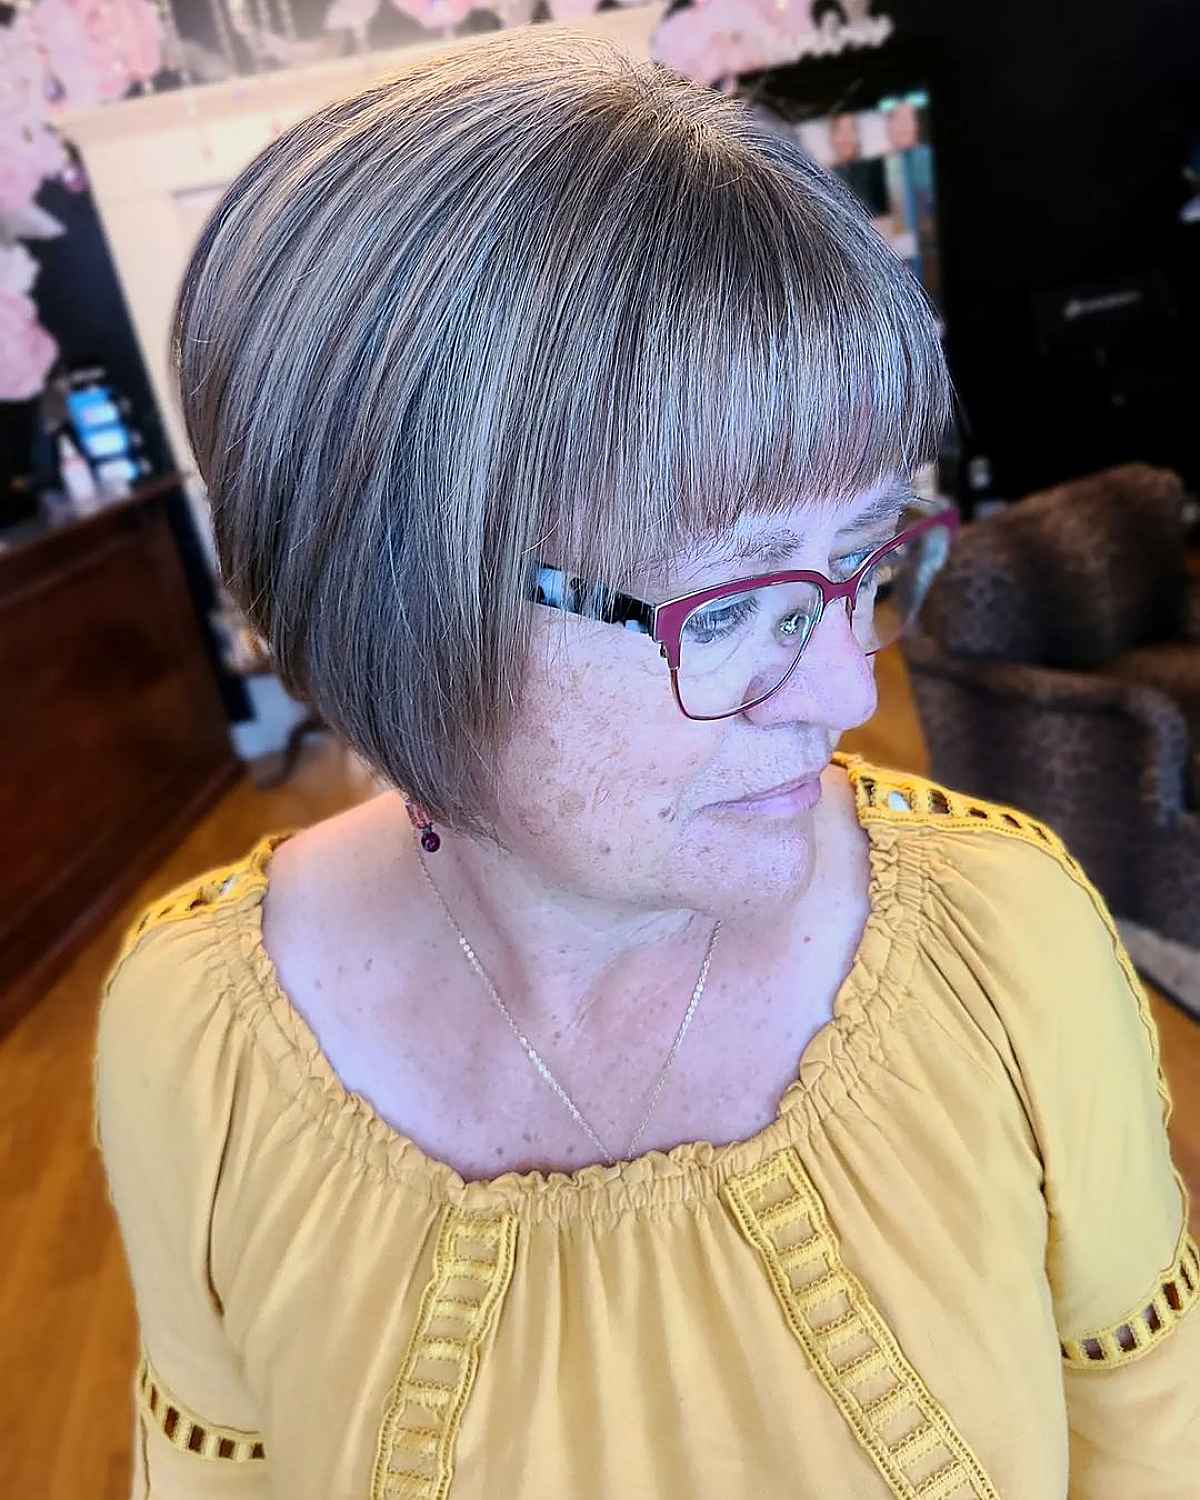 18 Angled Bobs for Women Over 60 Who Want a Chic Look